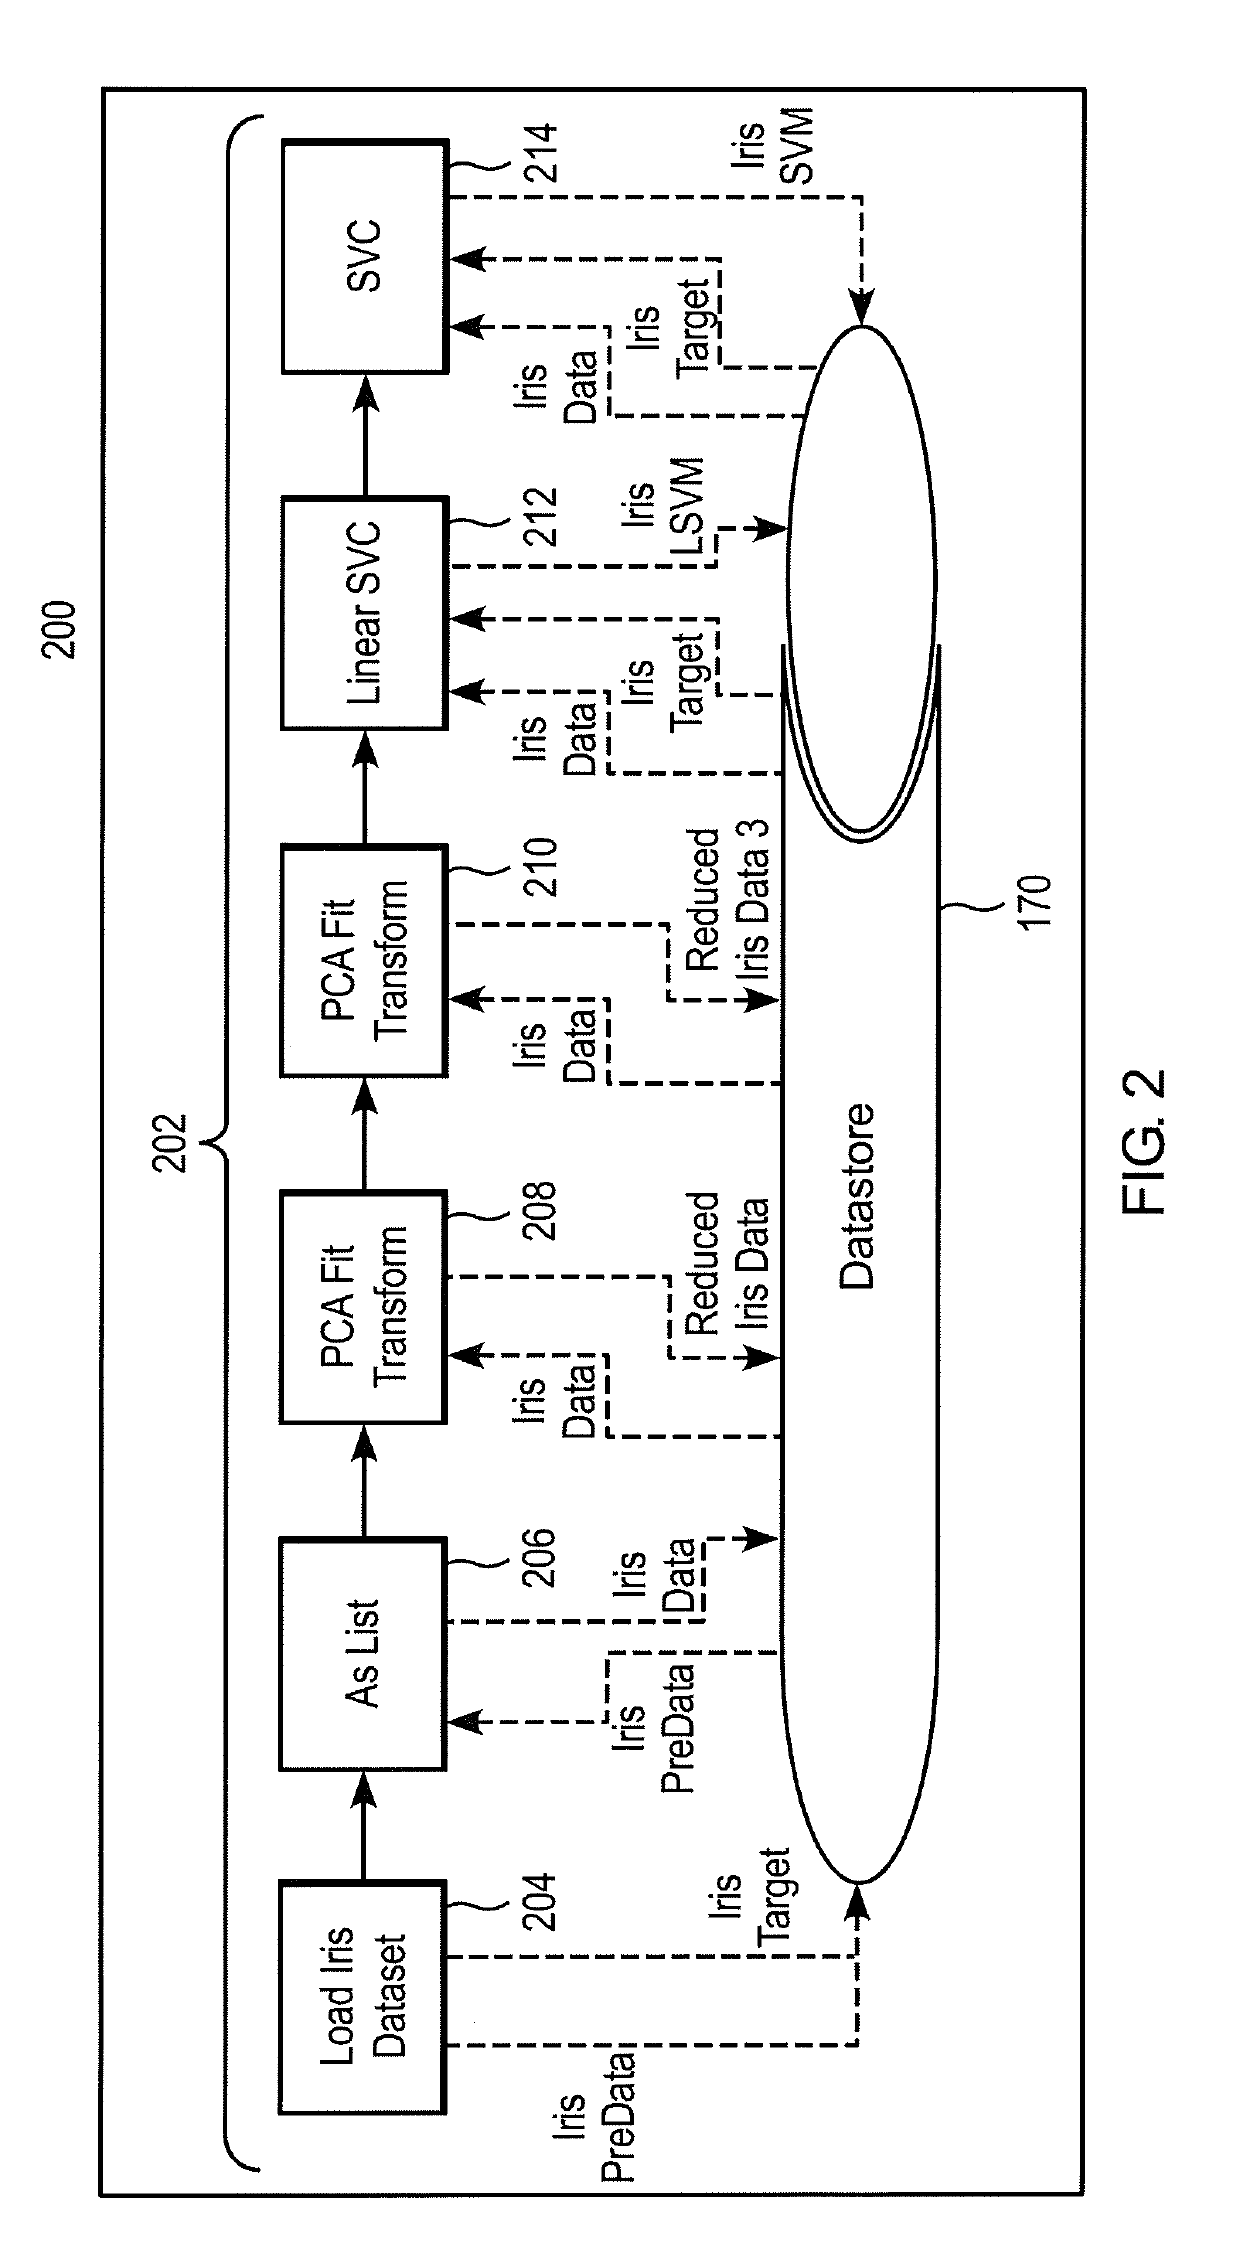 Method and system to provide a generalized framework for dynamic creation of module analytic applications